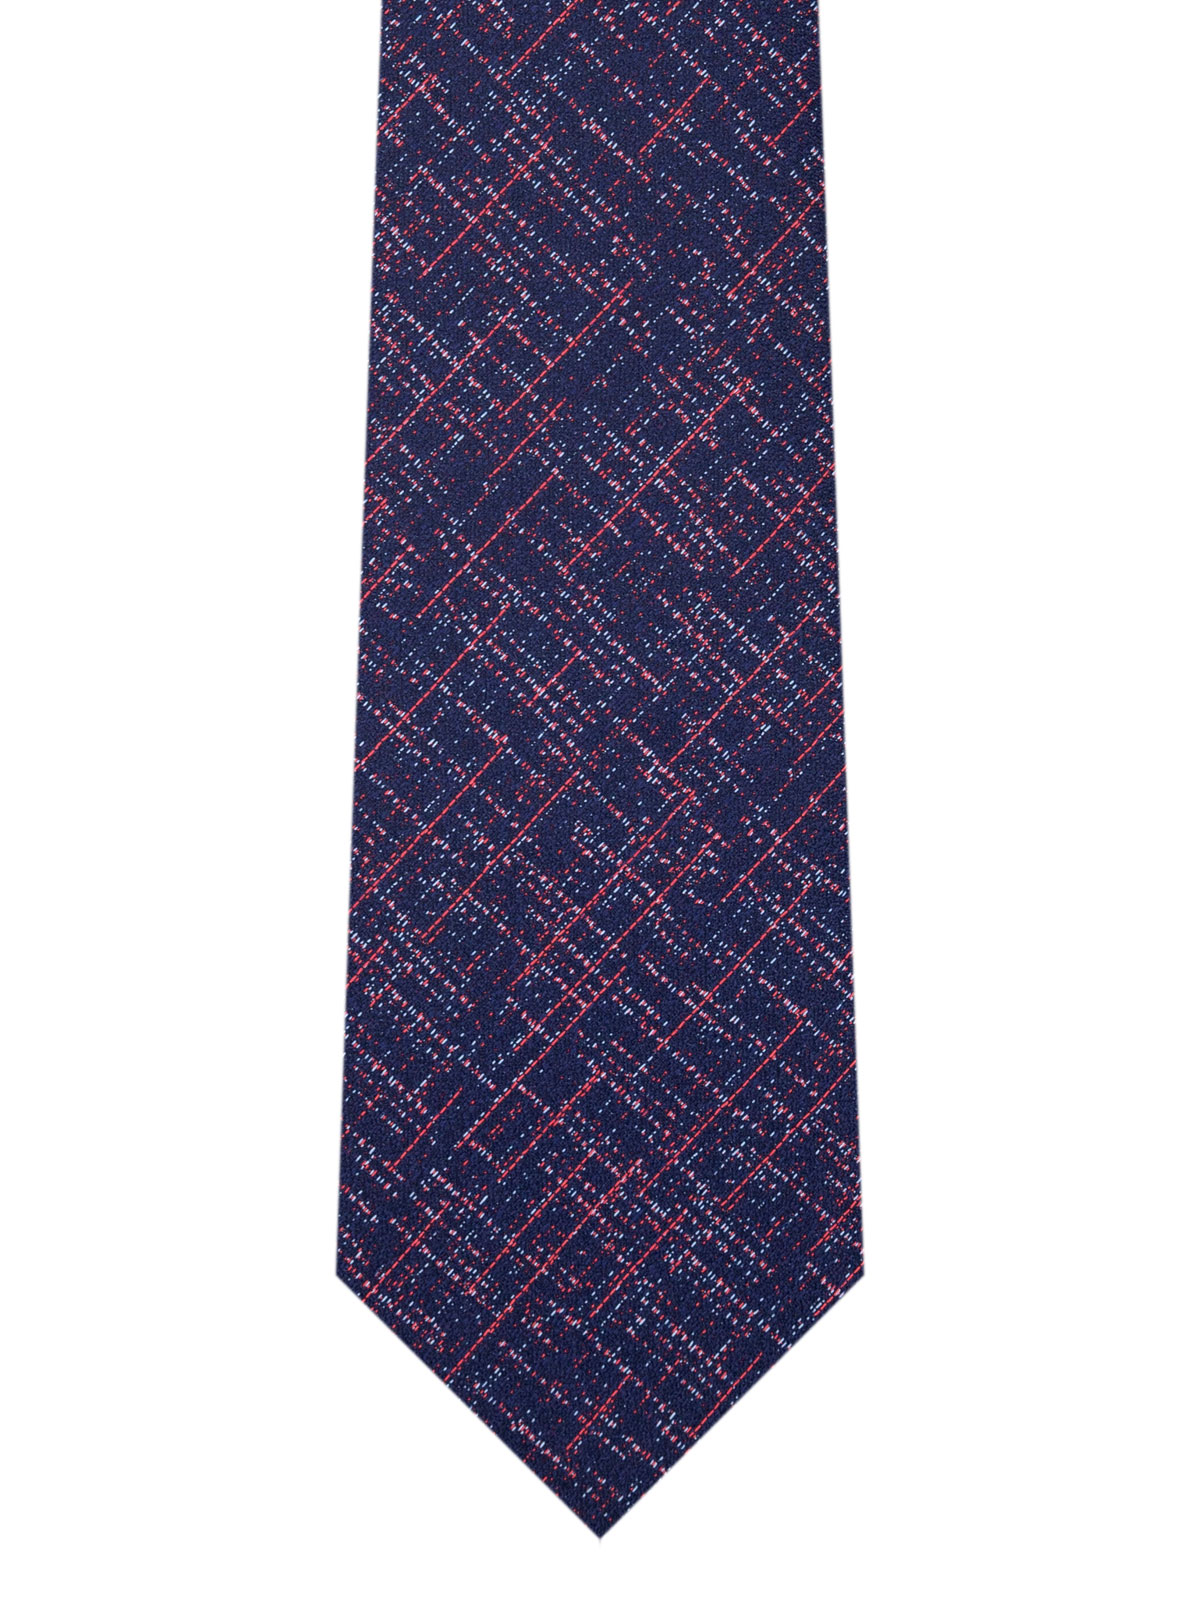 Tie in blue with colored threads - 10169 - € 14.06 img2